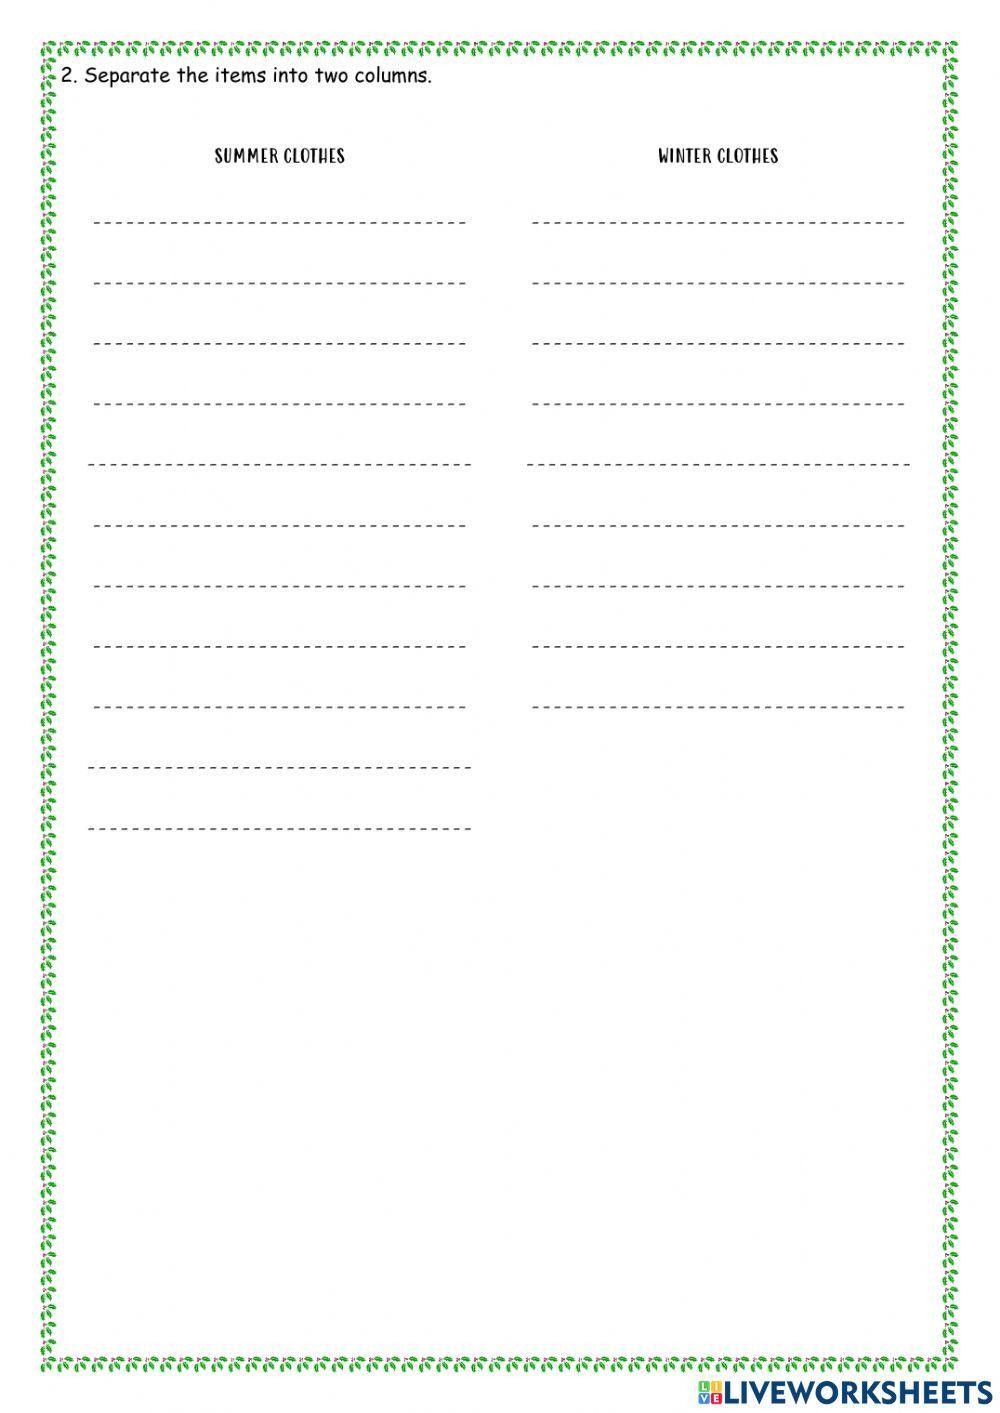 Winter and summer clothes interactive worksheet